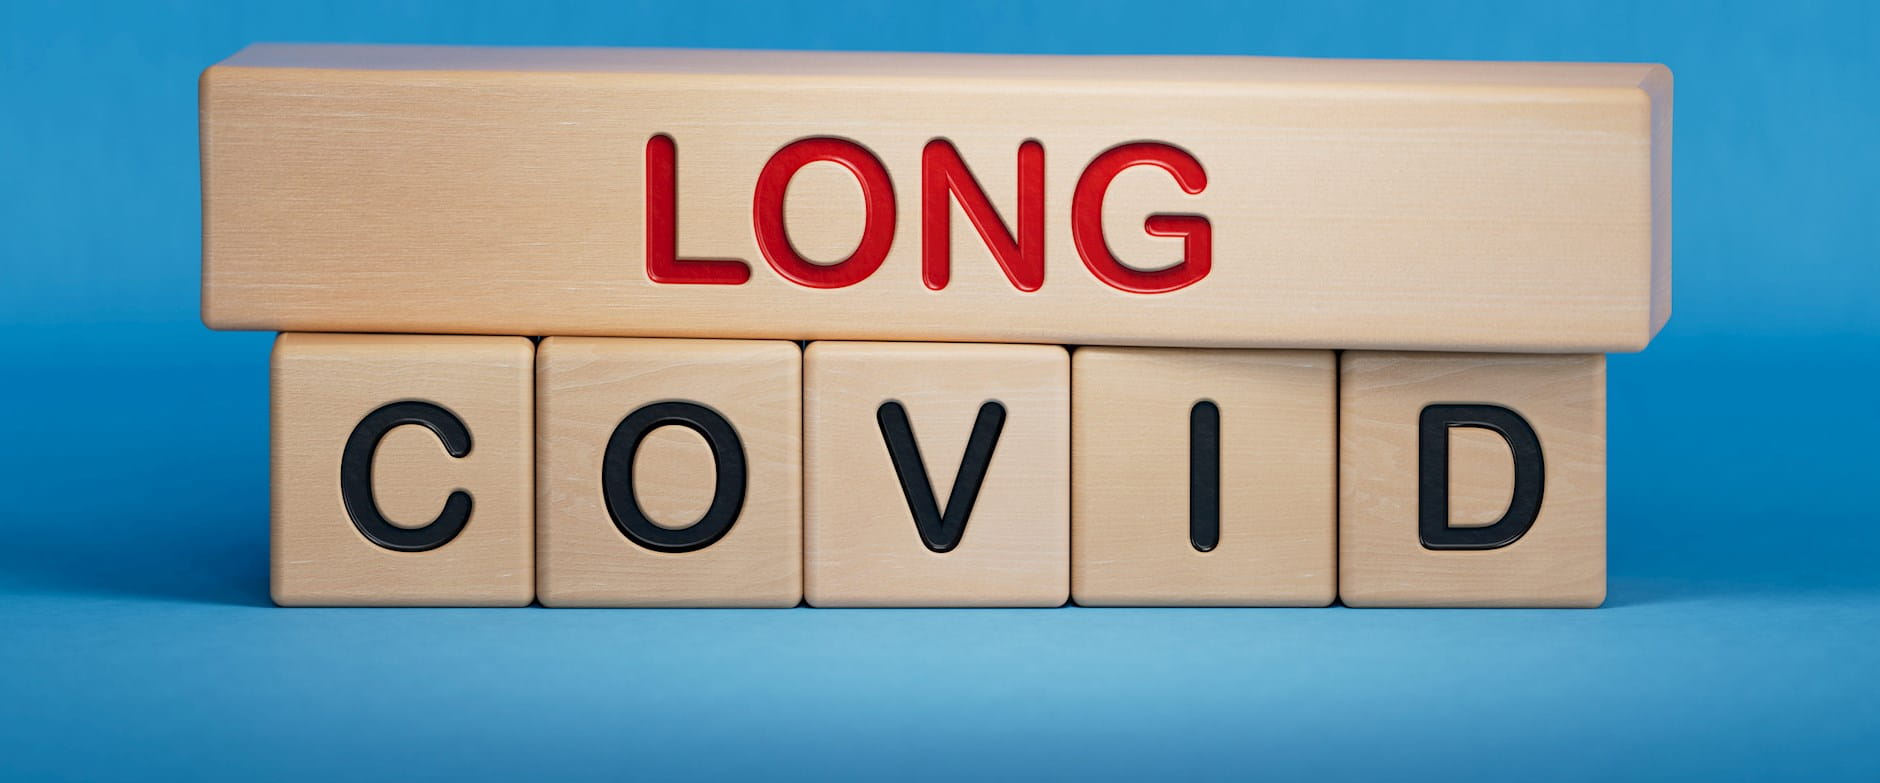 Long Covid spelled out on wooden blocks